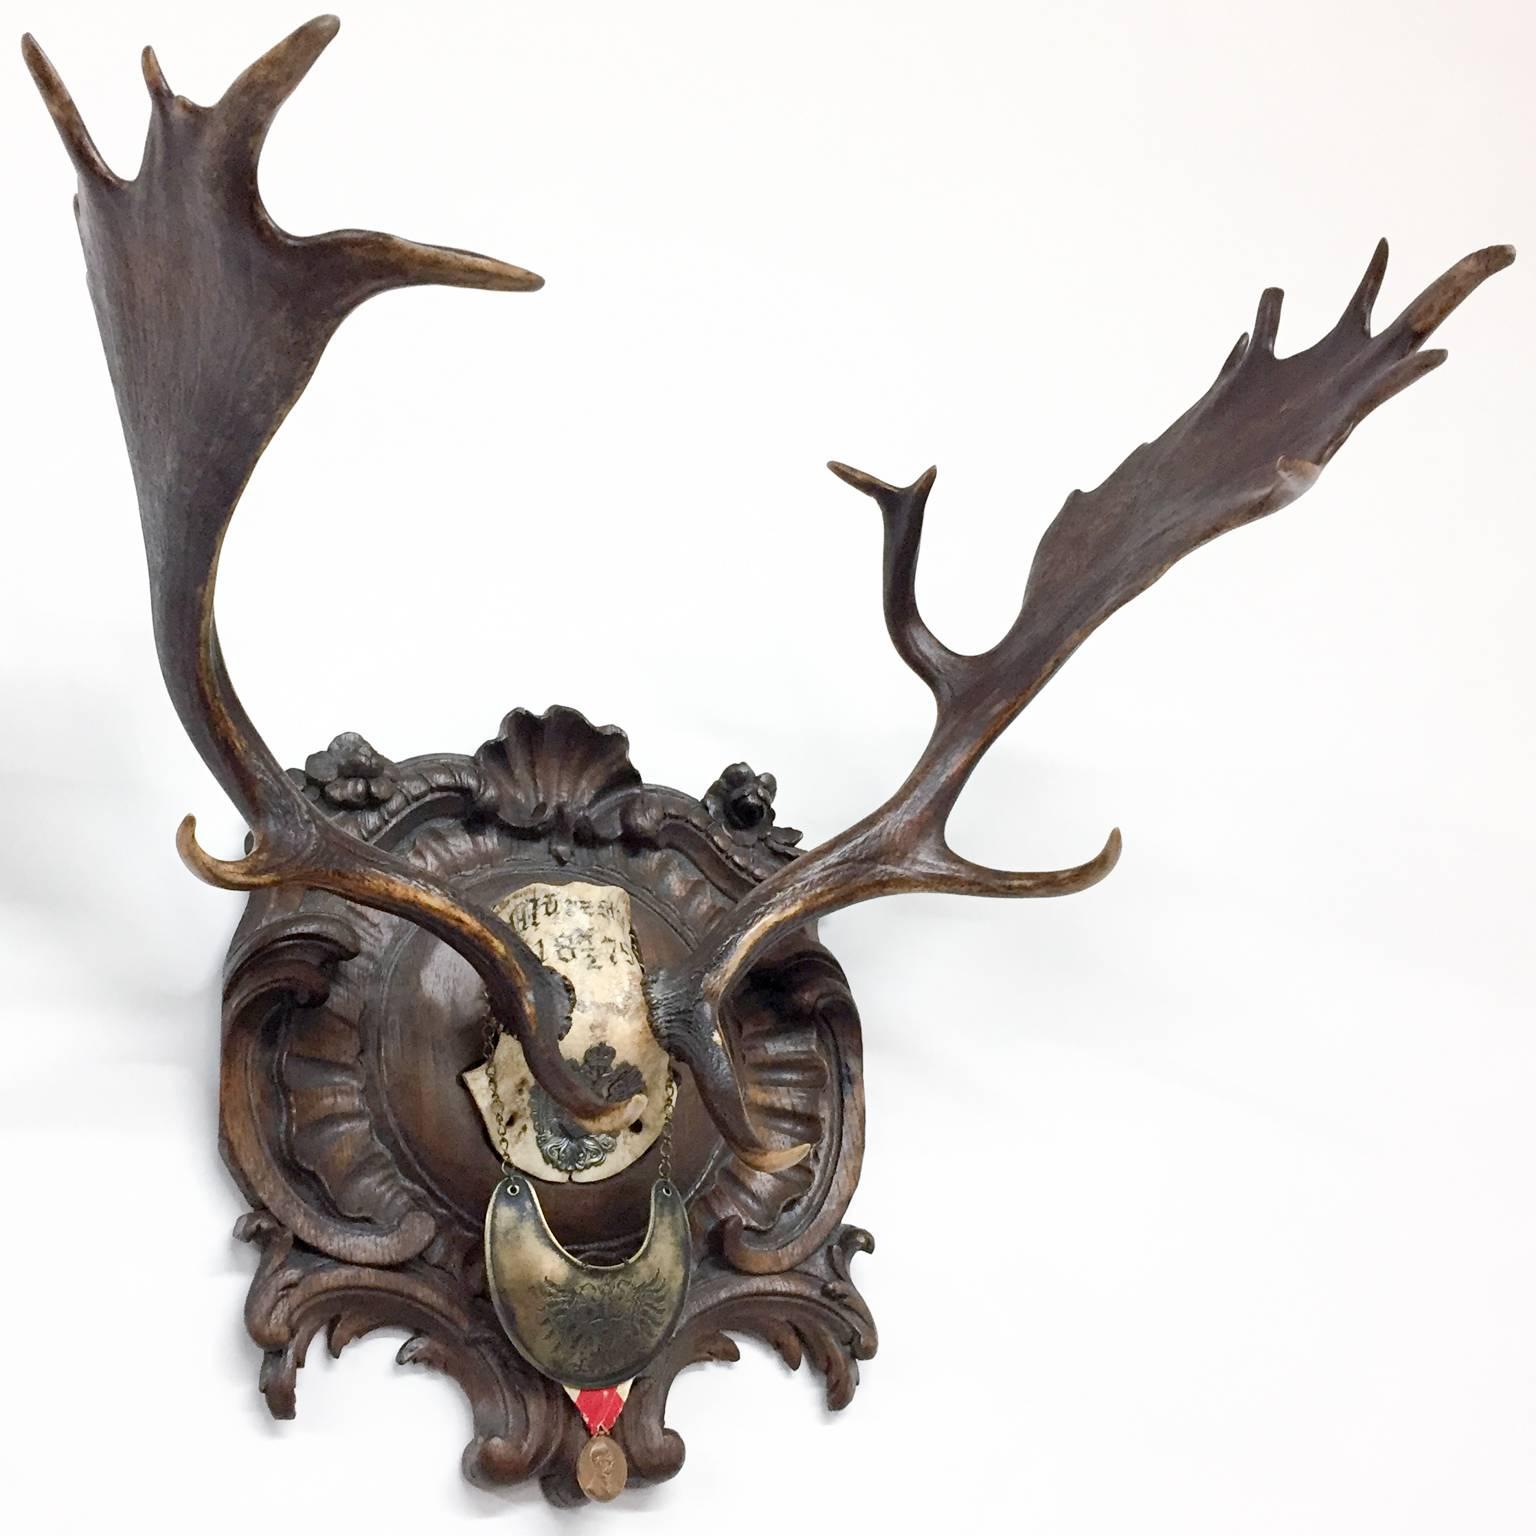 This 19th century fallow deer trophy originally from Emperor Franz Josef's castle in Eckartsau in the Southern Austrian Alps. This trophy features a hand-carved original plaque, decorated with Austro-Hungarian wappen, gorget and veterans medal. The